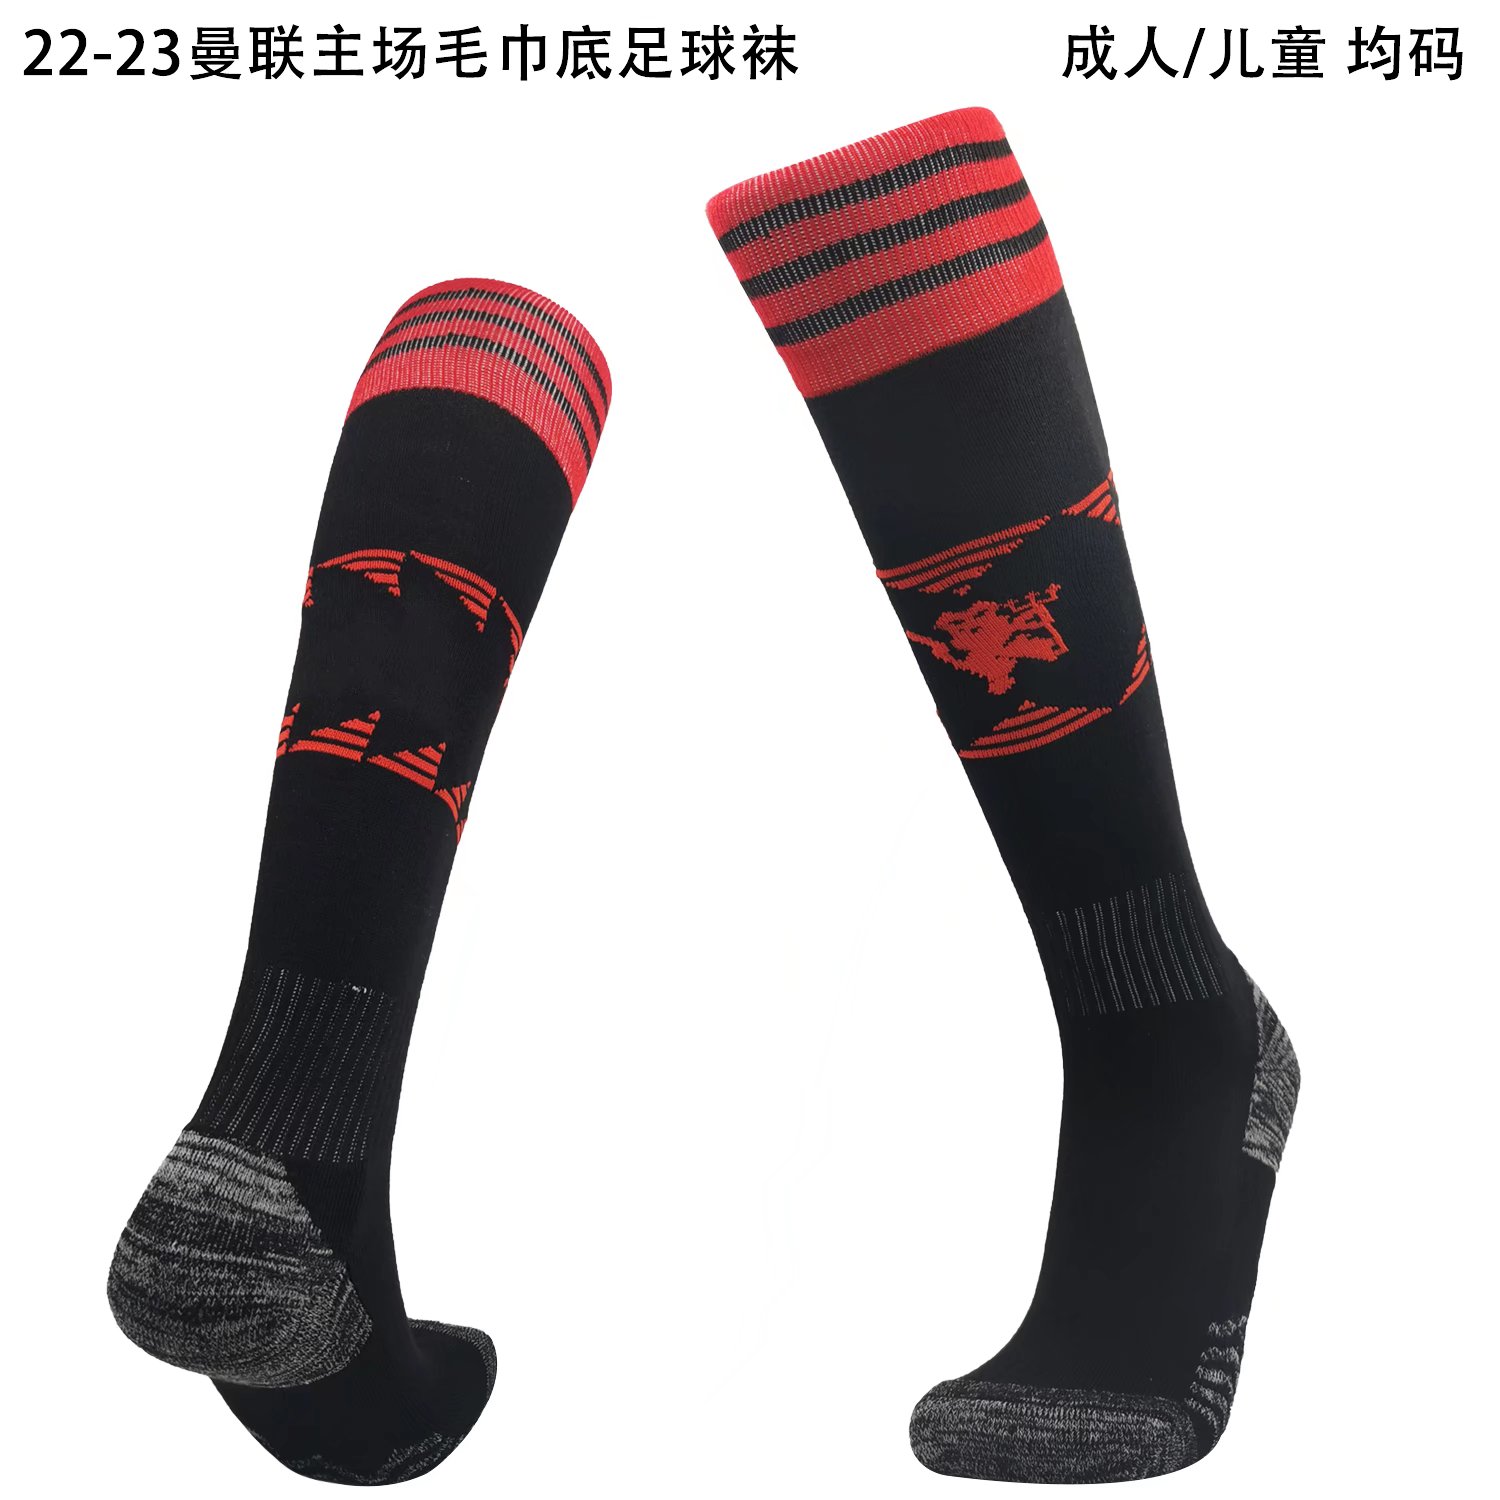 2022-2023 MANCHESTER UNITED Socks  CAN ONLY BE BOUGHT WITH OTHER ITEMS 